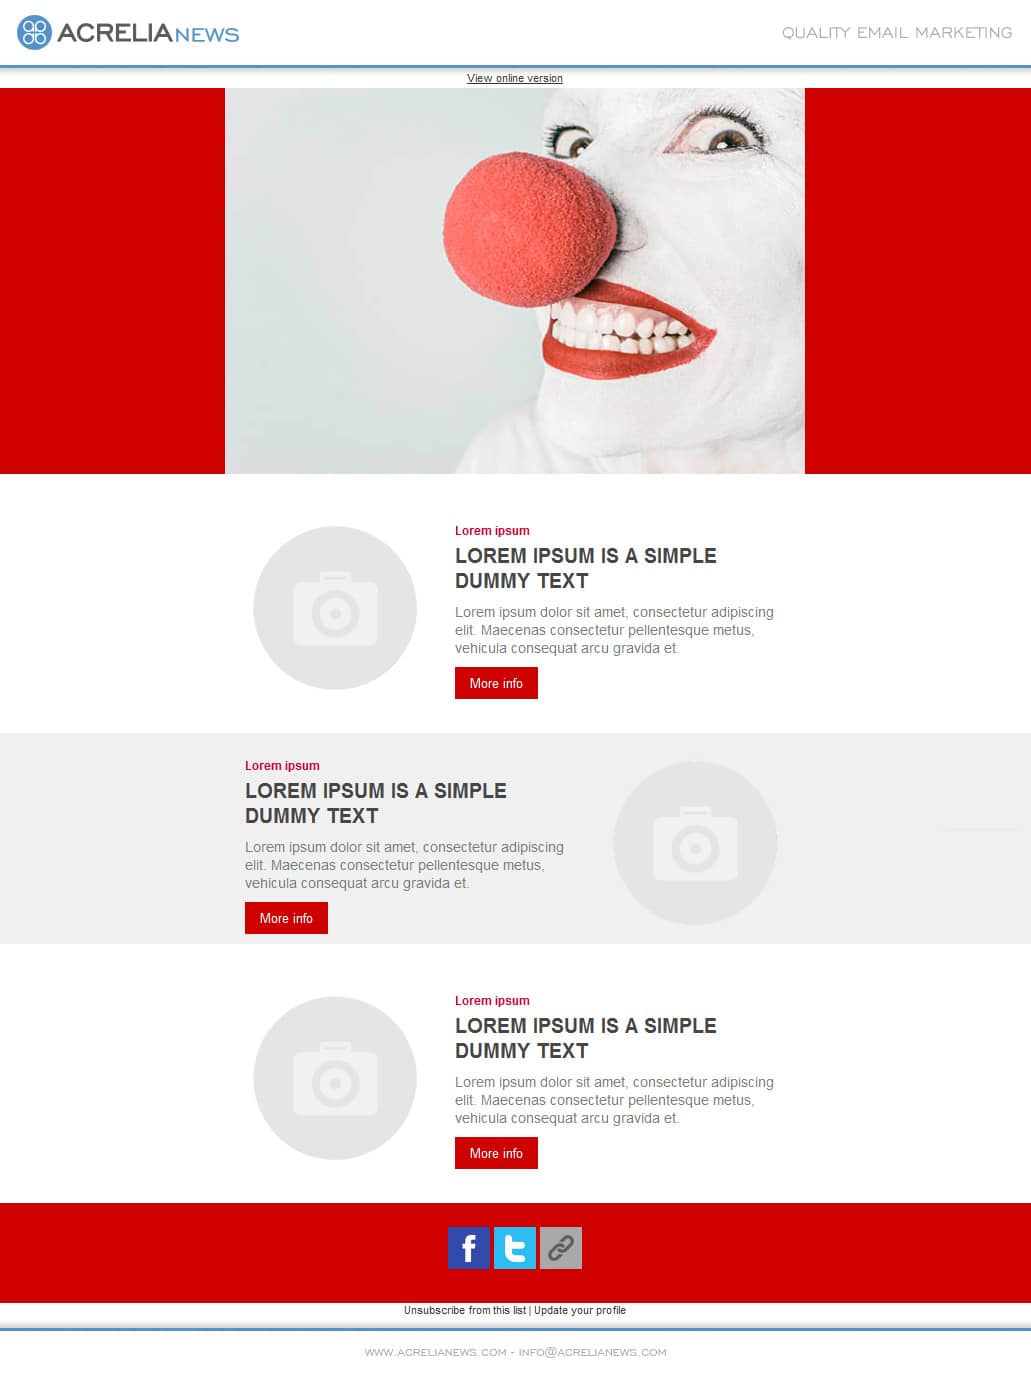 Responsive email template: Spots red